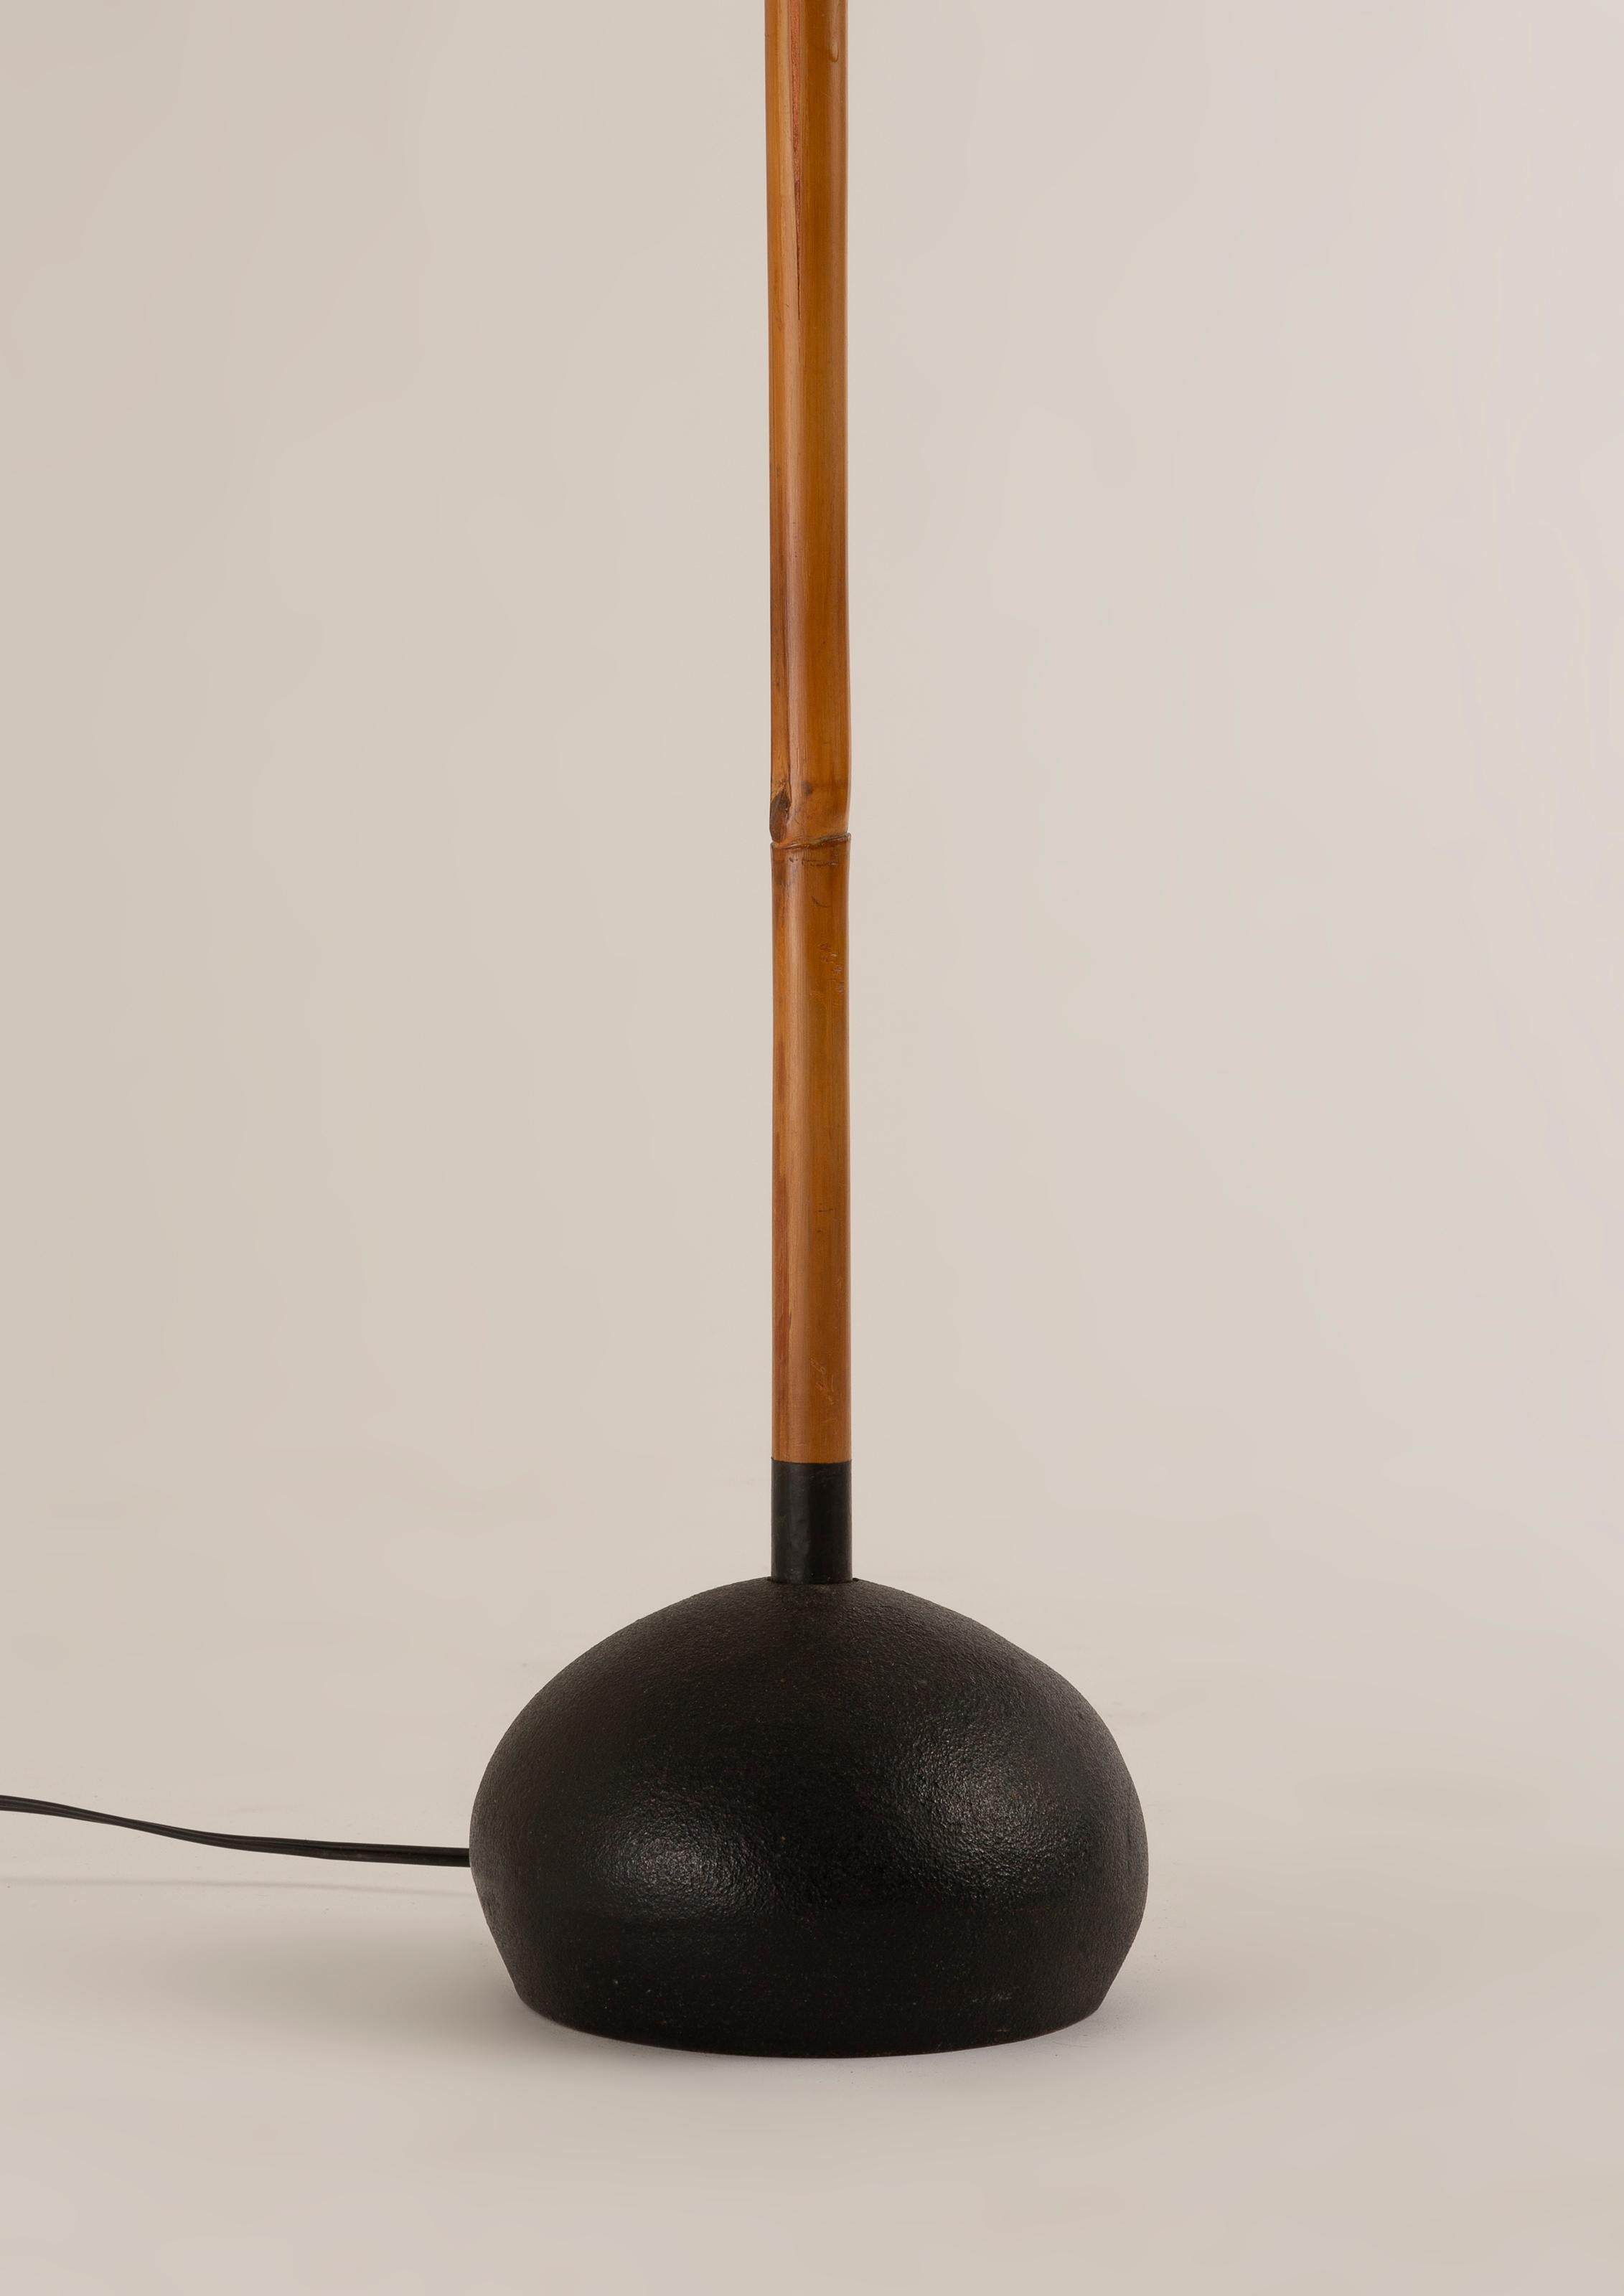 Other Pair of Floor Lamps in the Style of Isamu Noguchi and His Akari